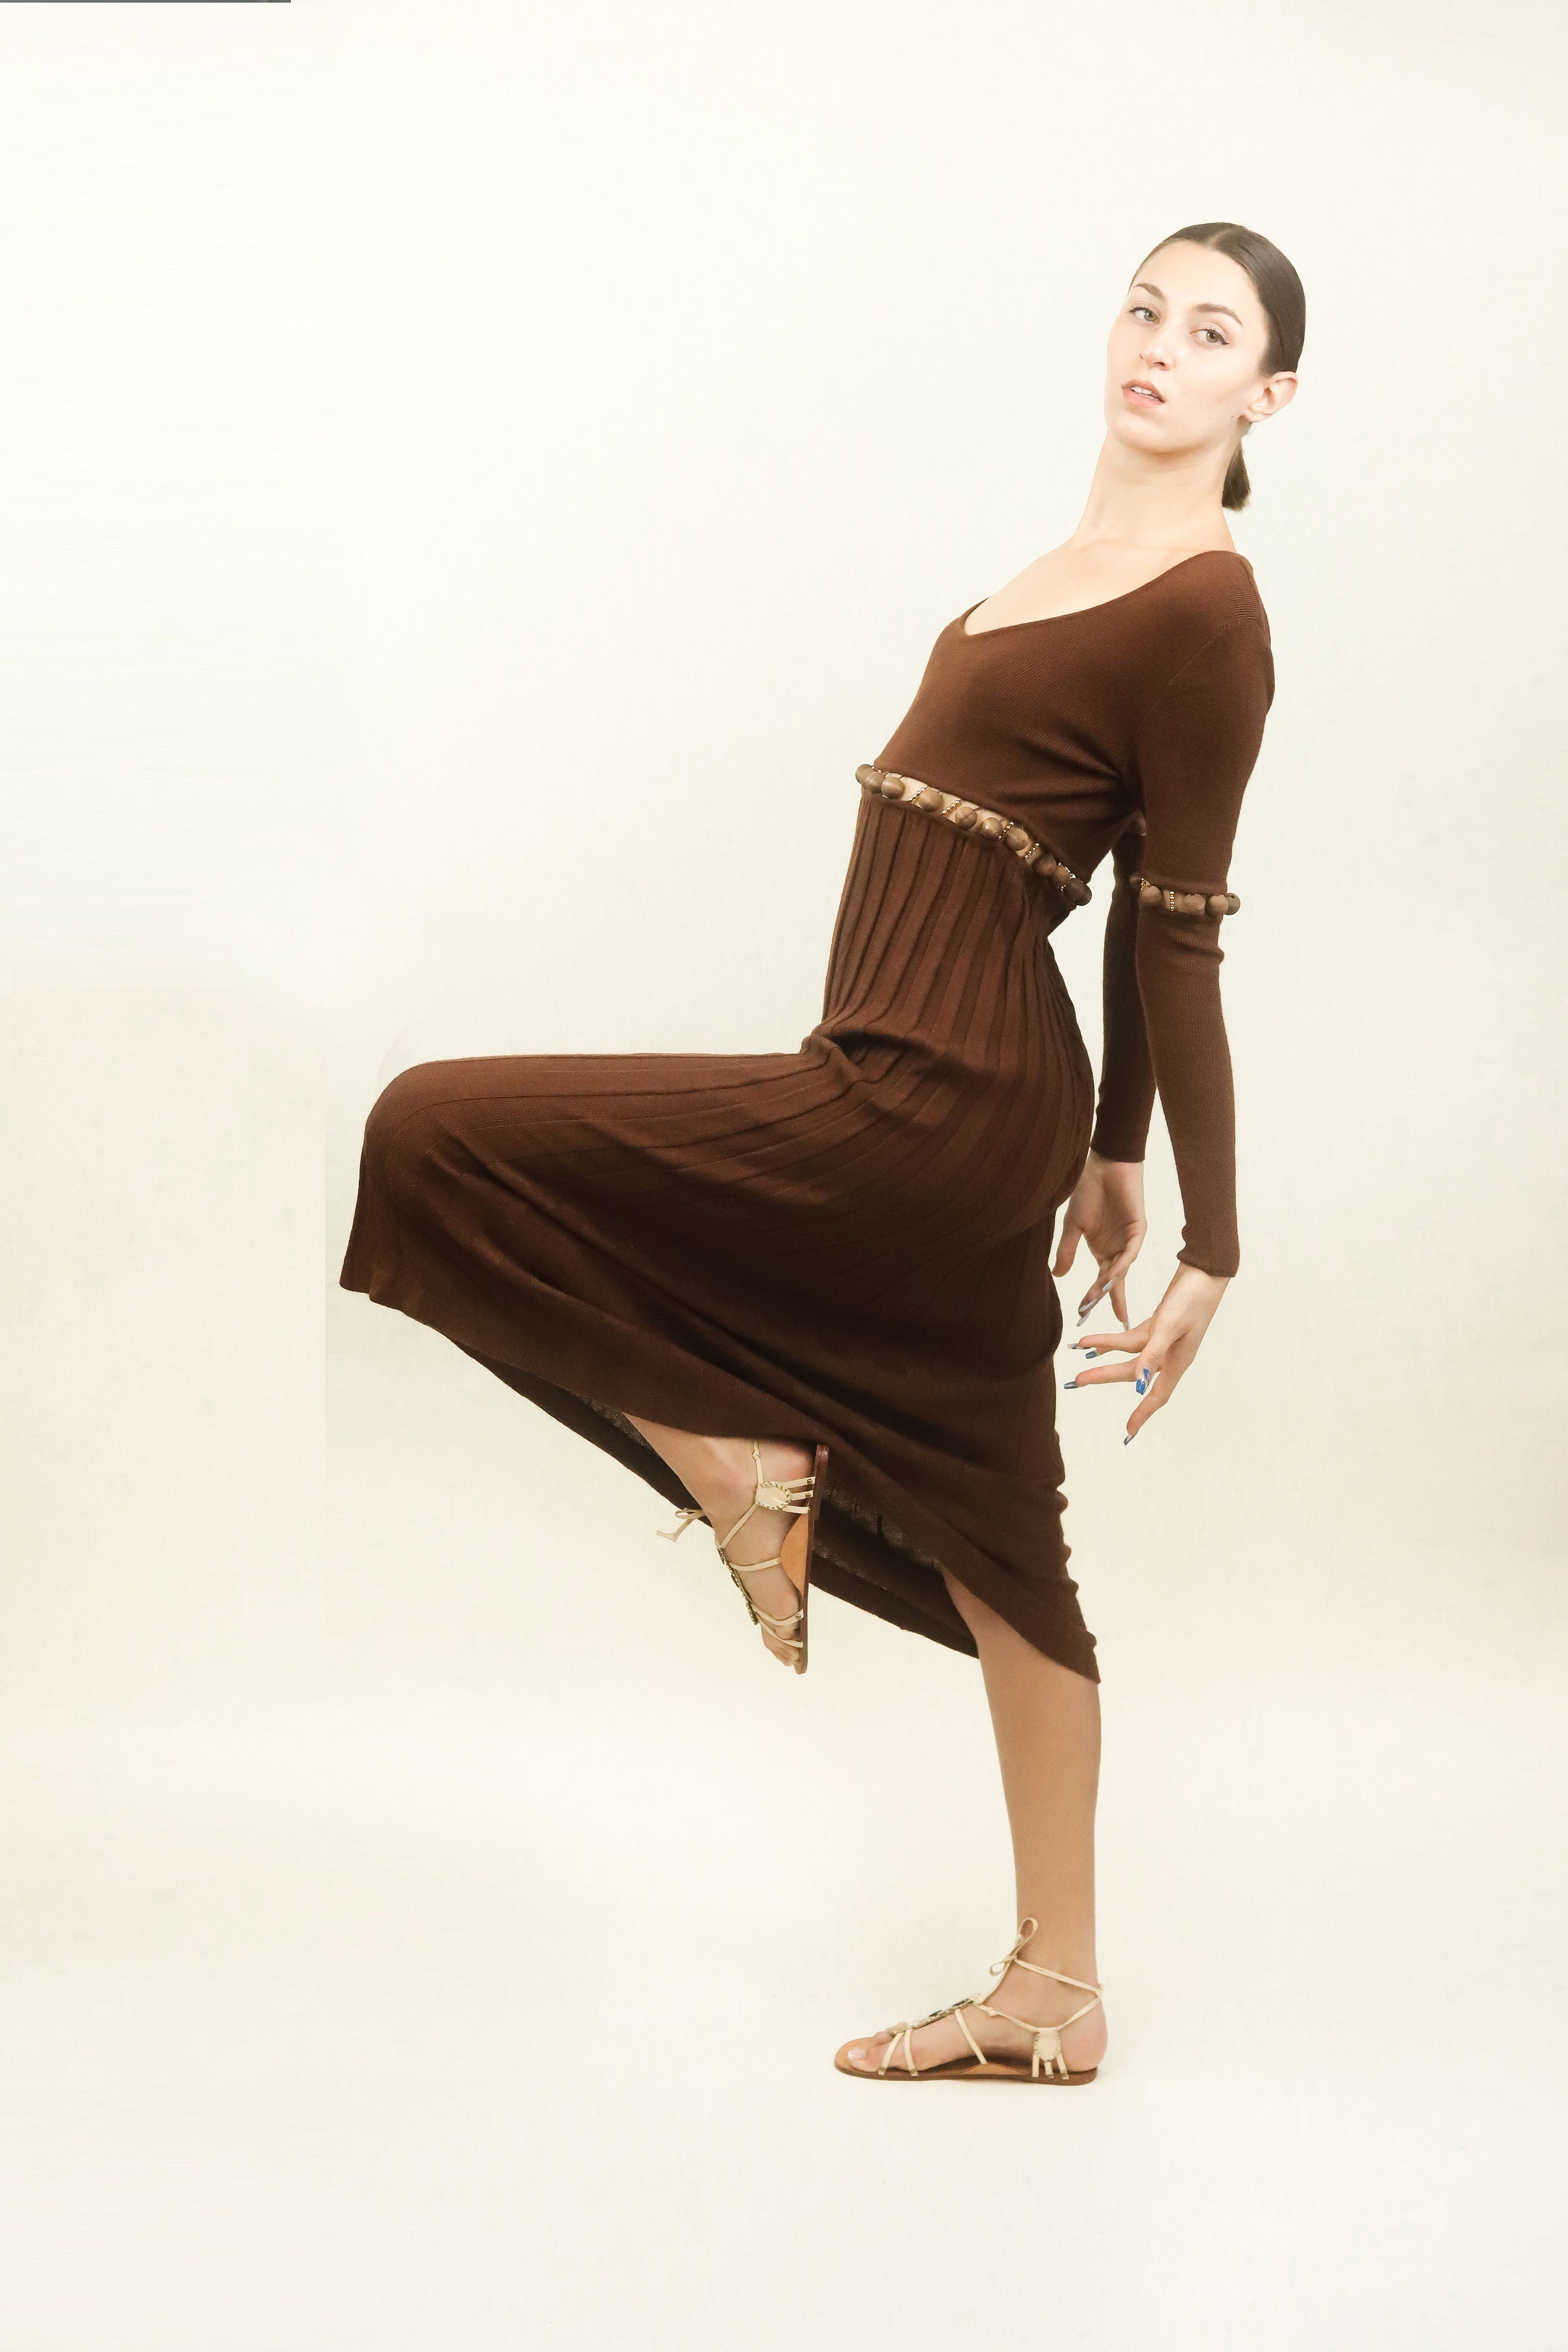 Laura Biagiotti Brown Knit Cut Out Beaded Dress